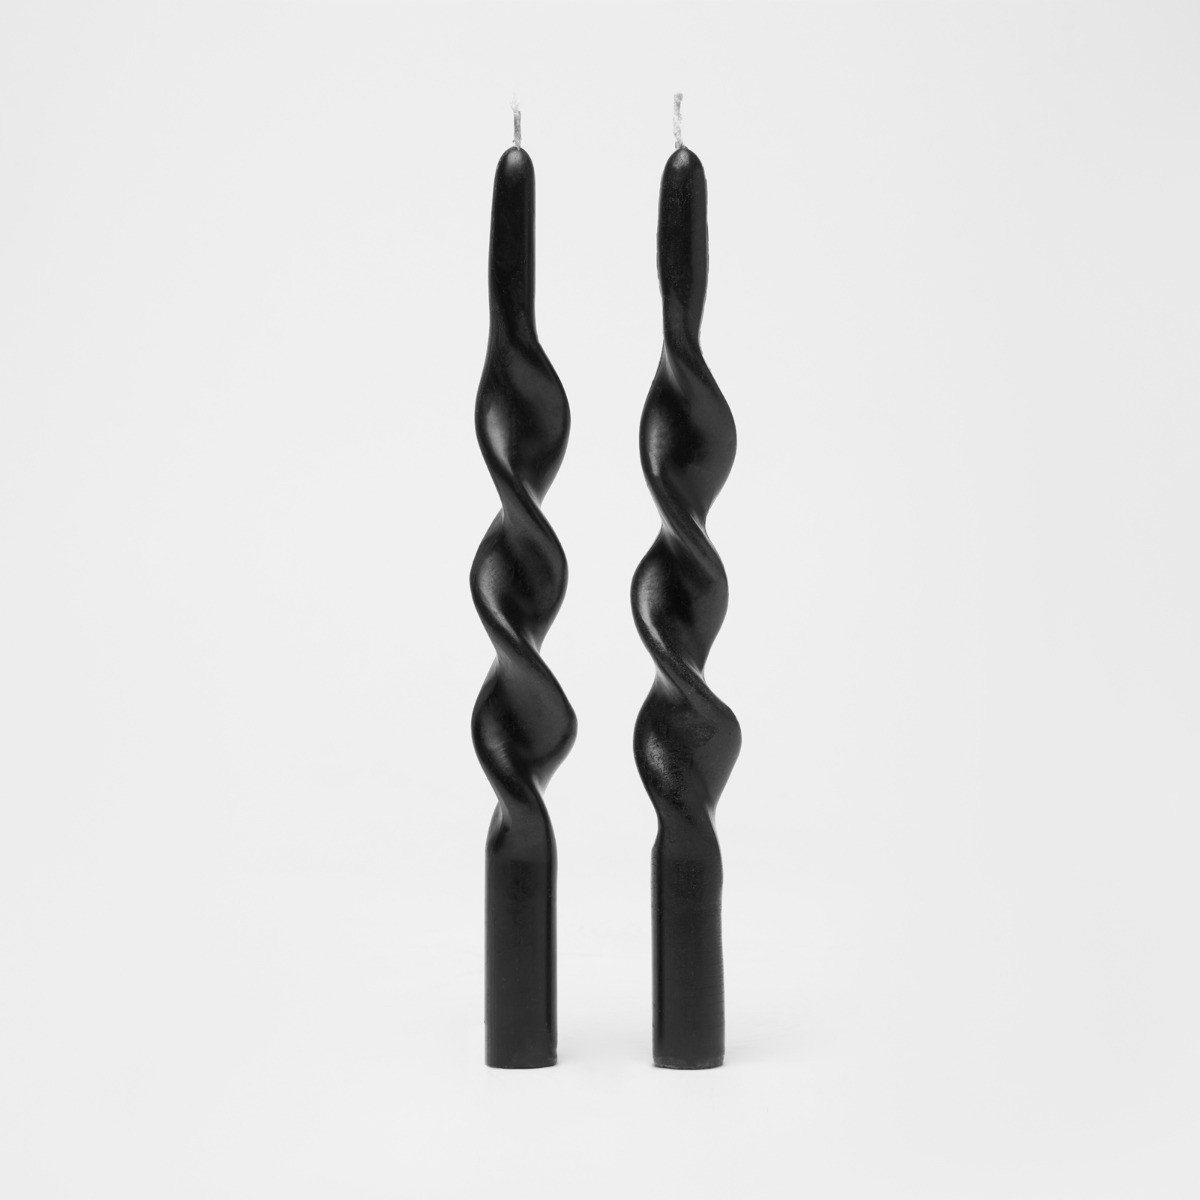 OHS Twisted Taper Candlestick, Black - Set of 2>